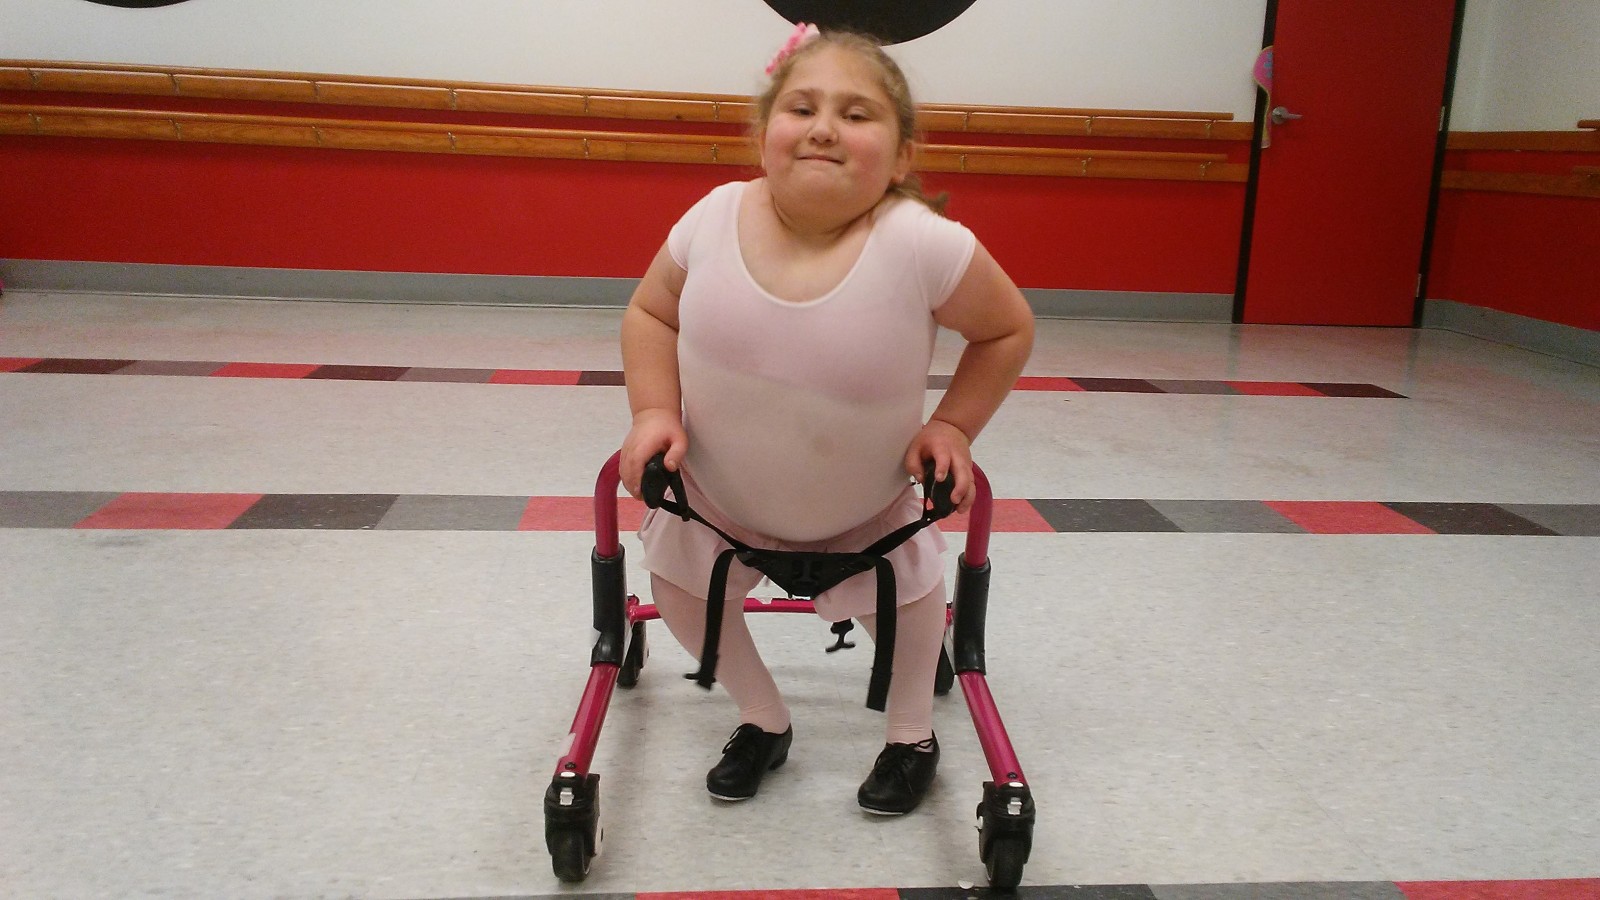 Dance studios and disability